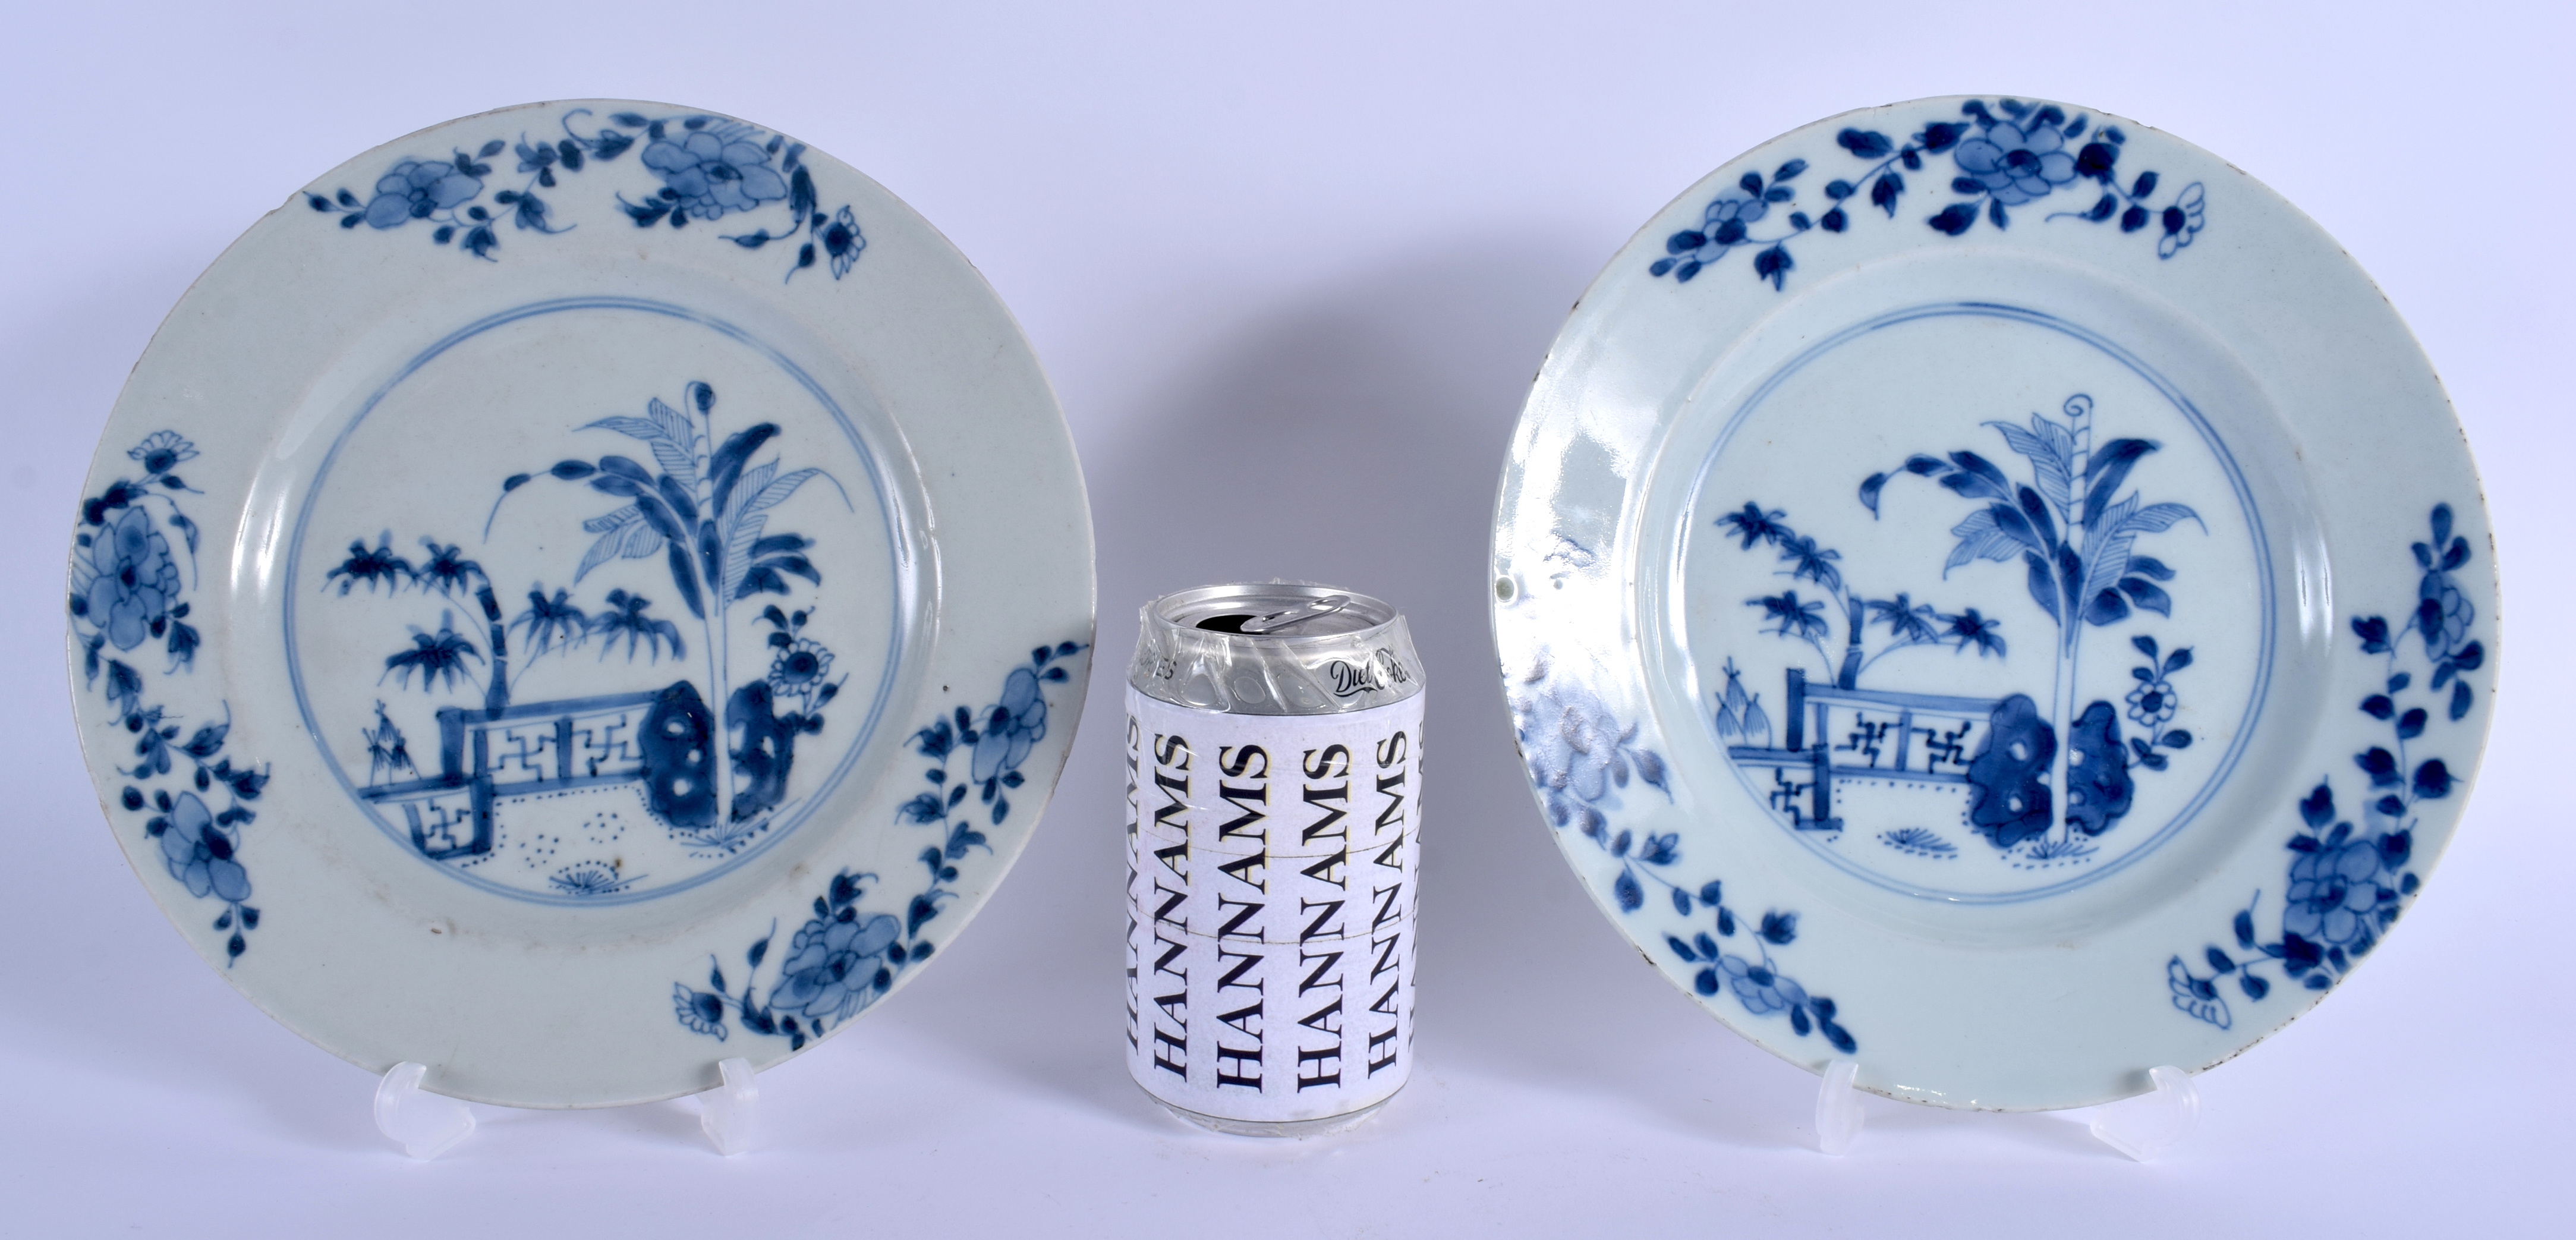 A PAIR OF 18TH CENTURY CHINESE EXPORT BLUE AND WHITE PORCELAIN PLATES Yongzheng/Qianlong. 22 cm diam